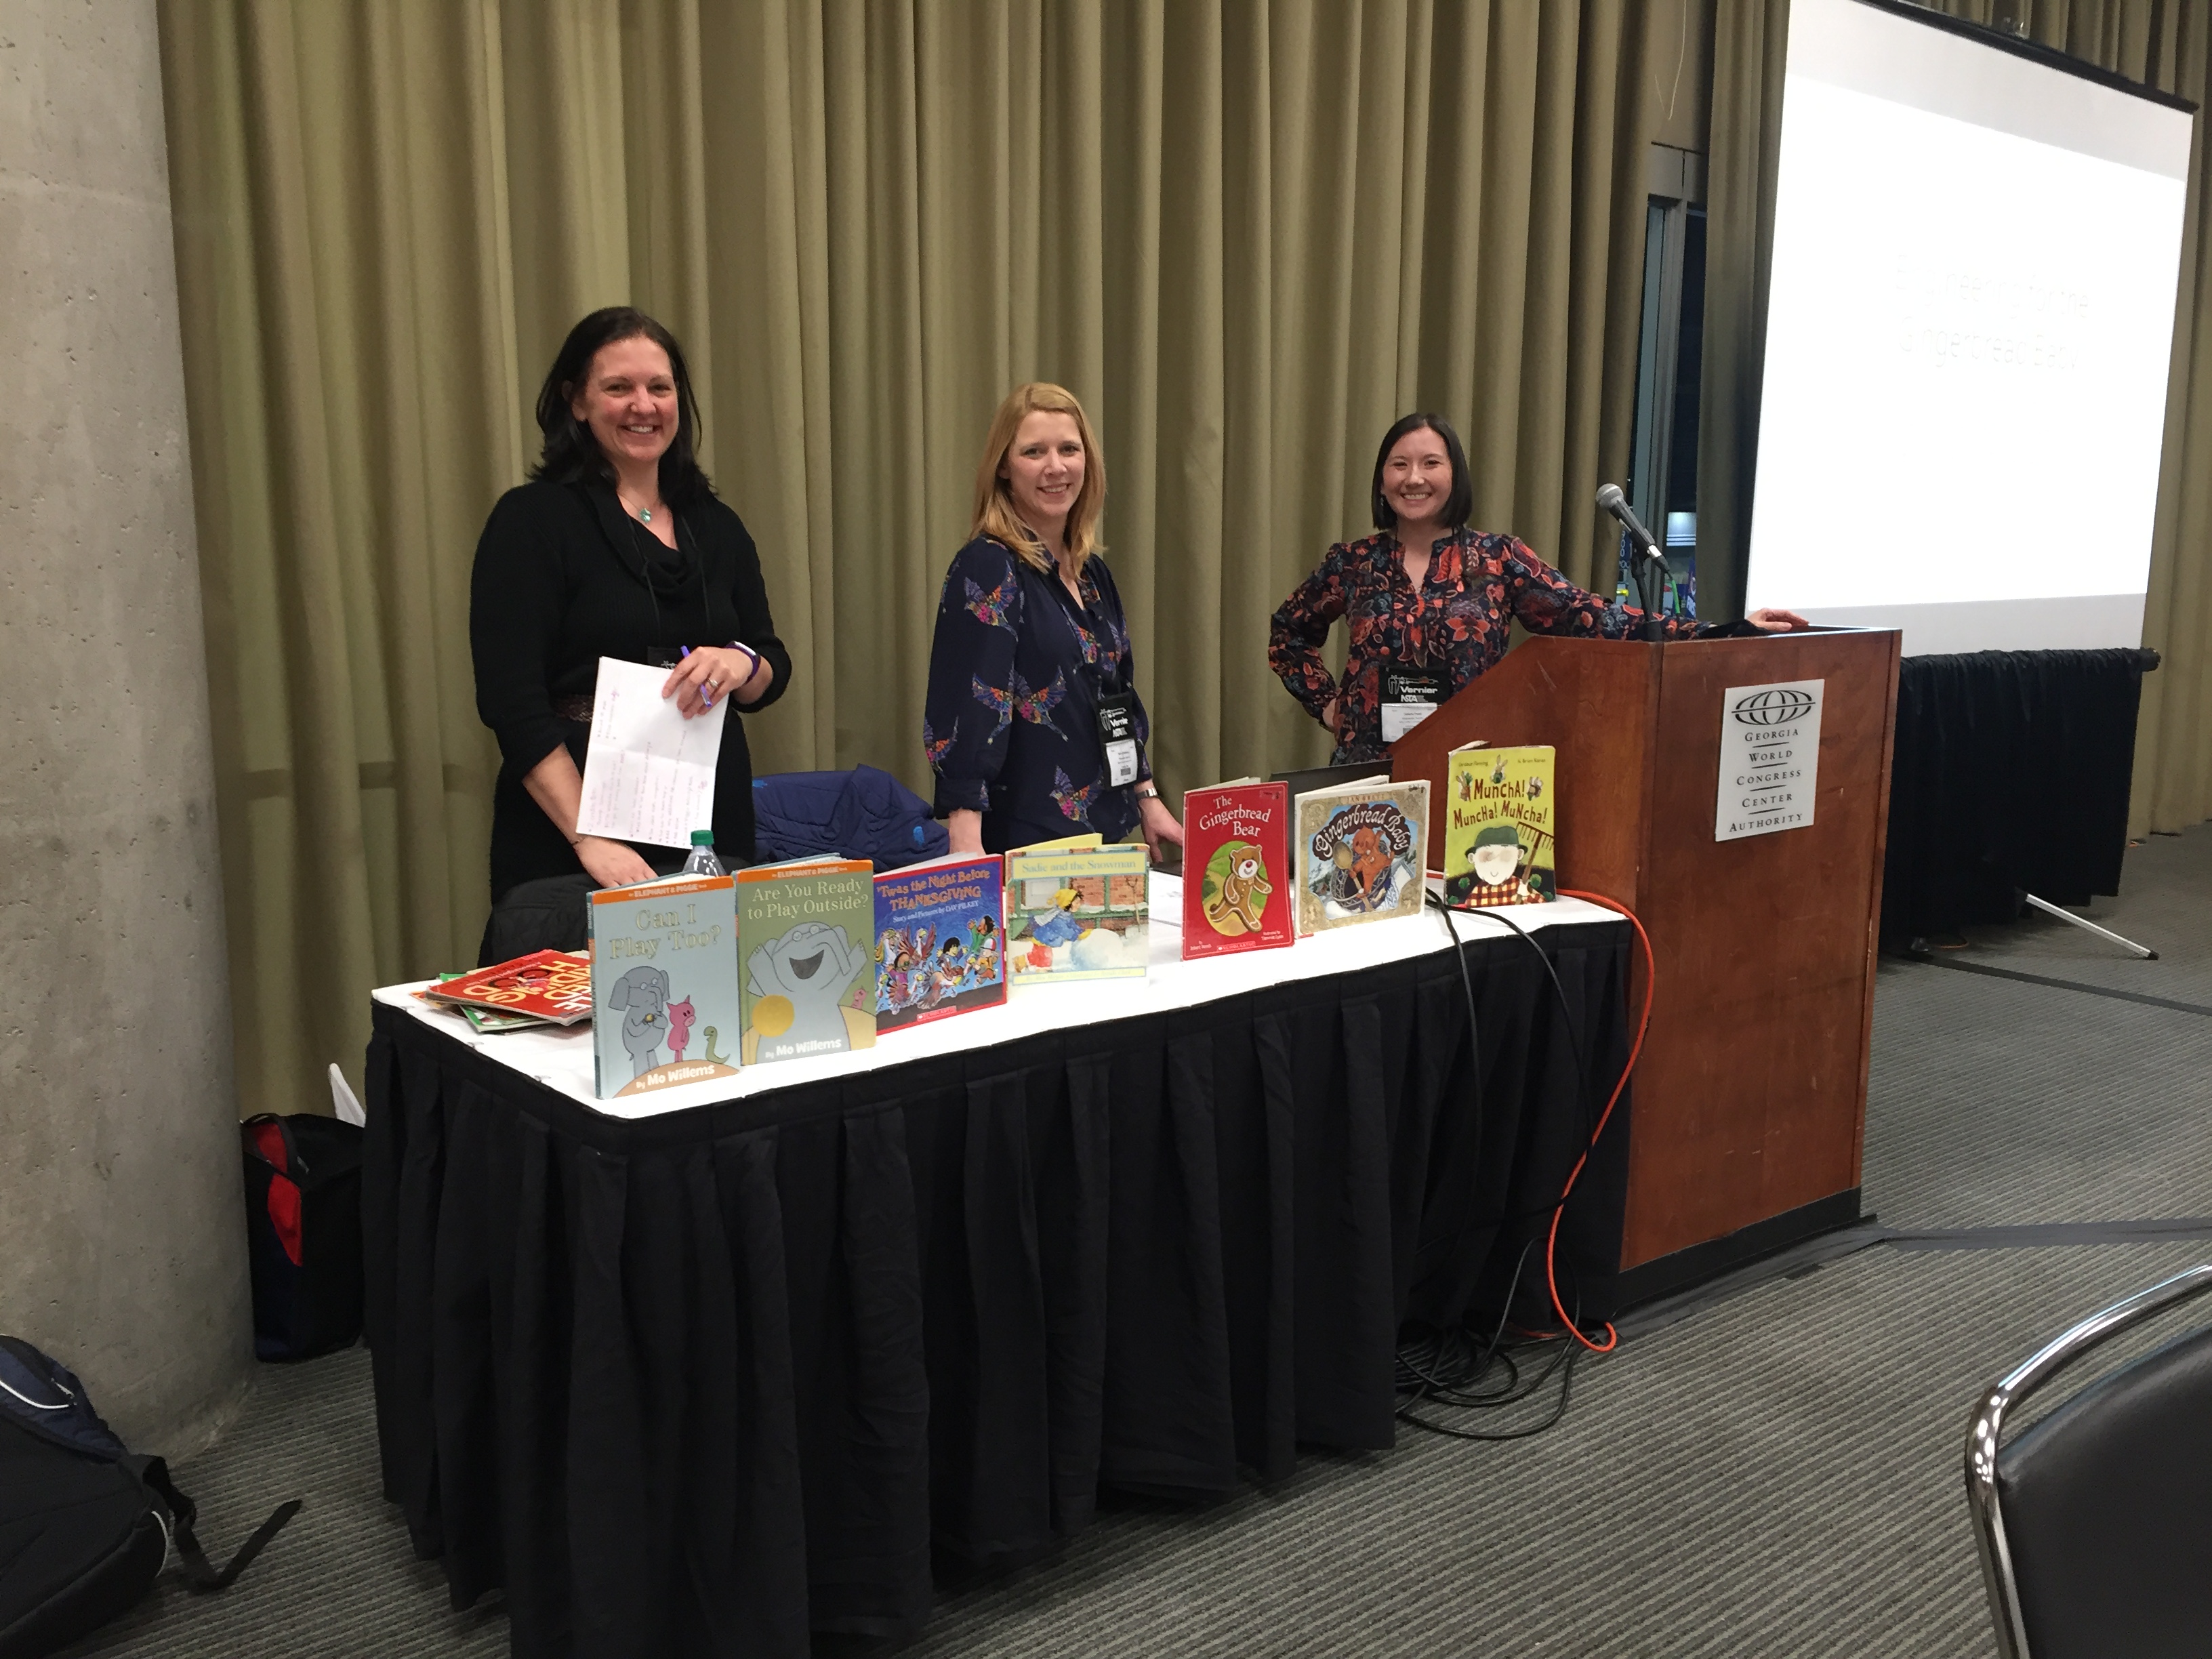 Presenters show a selection of gingerbread-related books.